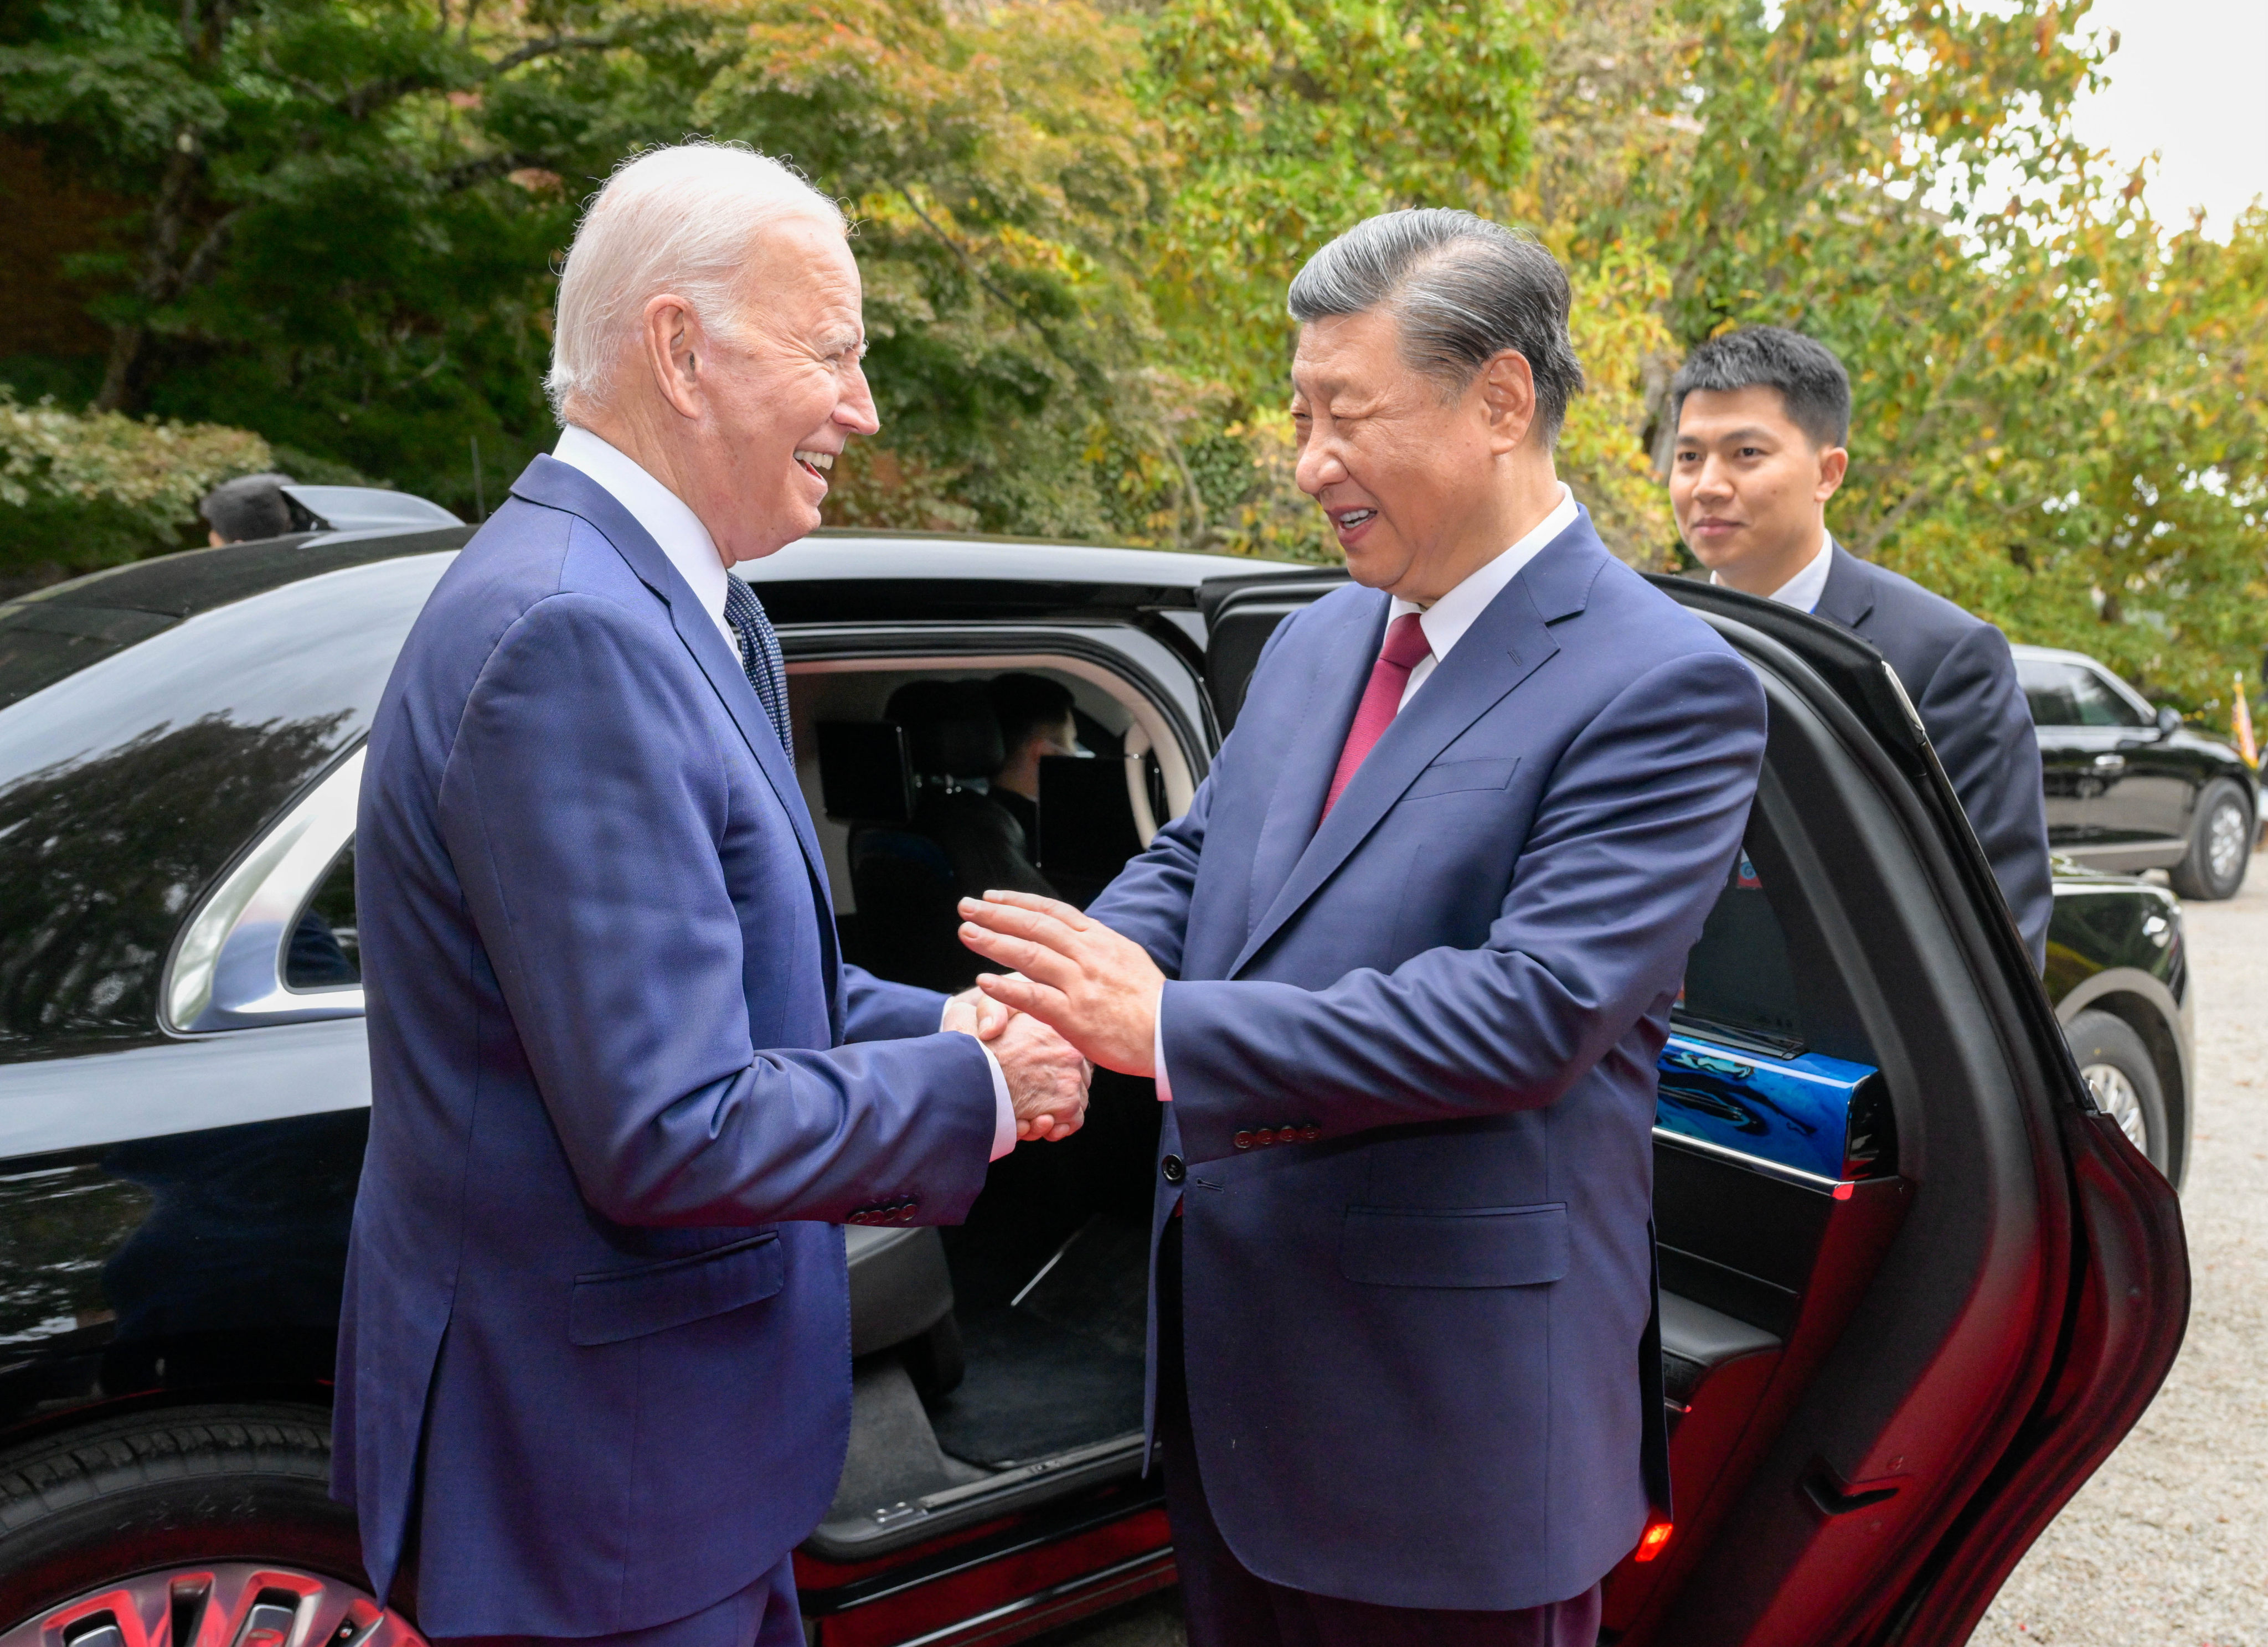 US President Joe Biden escorts his Chinese counterpart Xi Jinping to his car to bid farewell after their talks at Filoli Estate, just outside San Francisco, on Wednesday. Photo: Xinhua